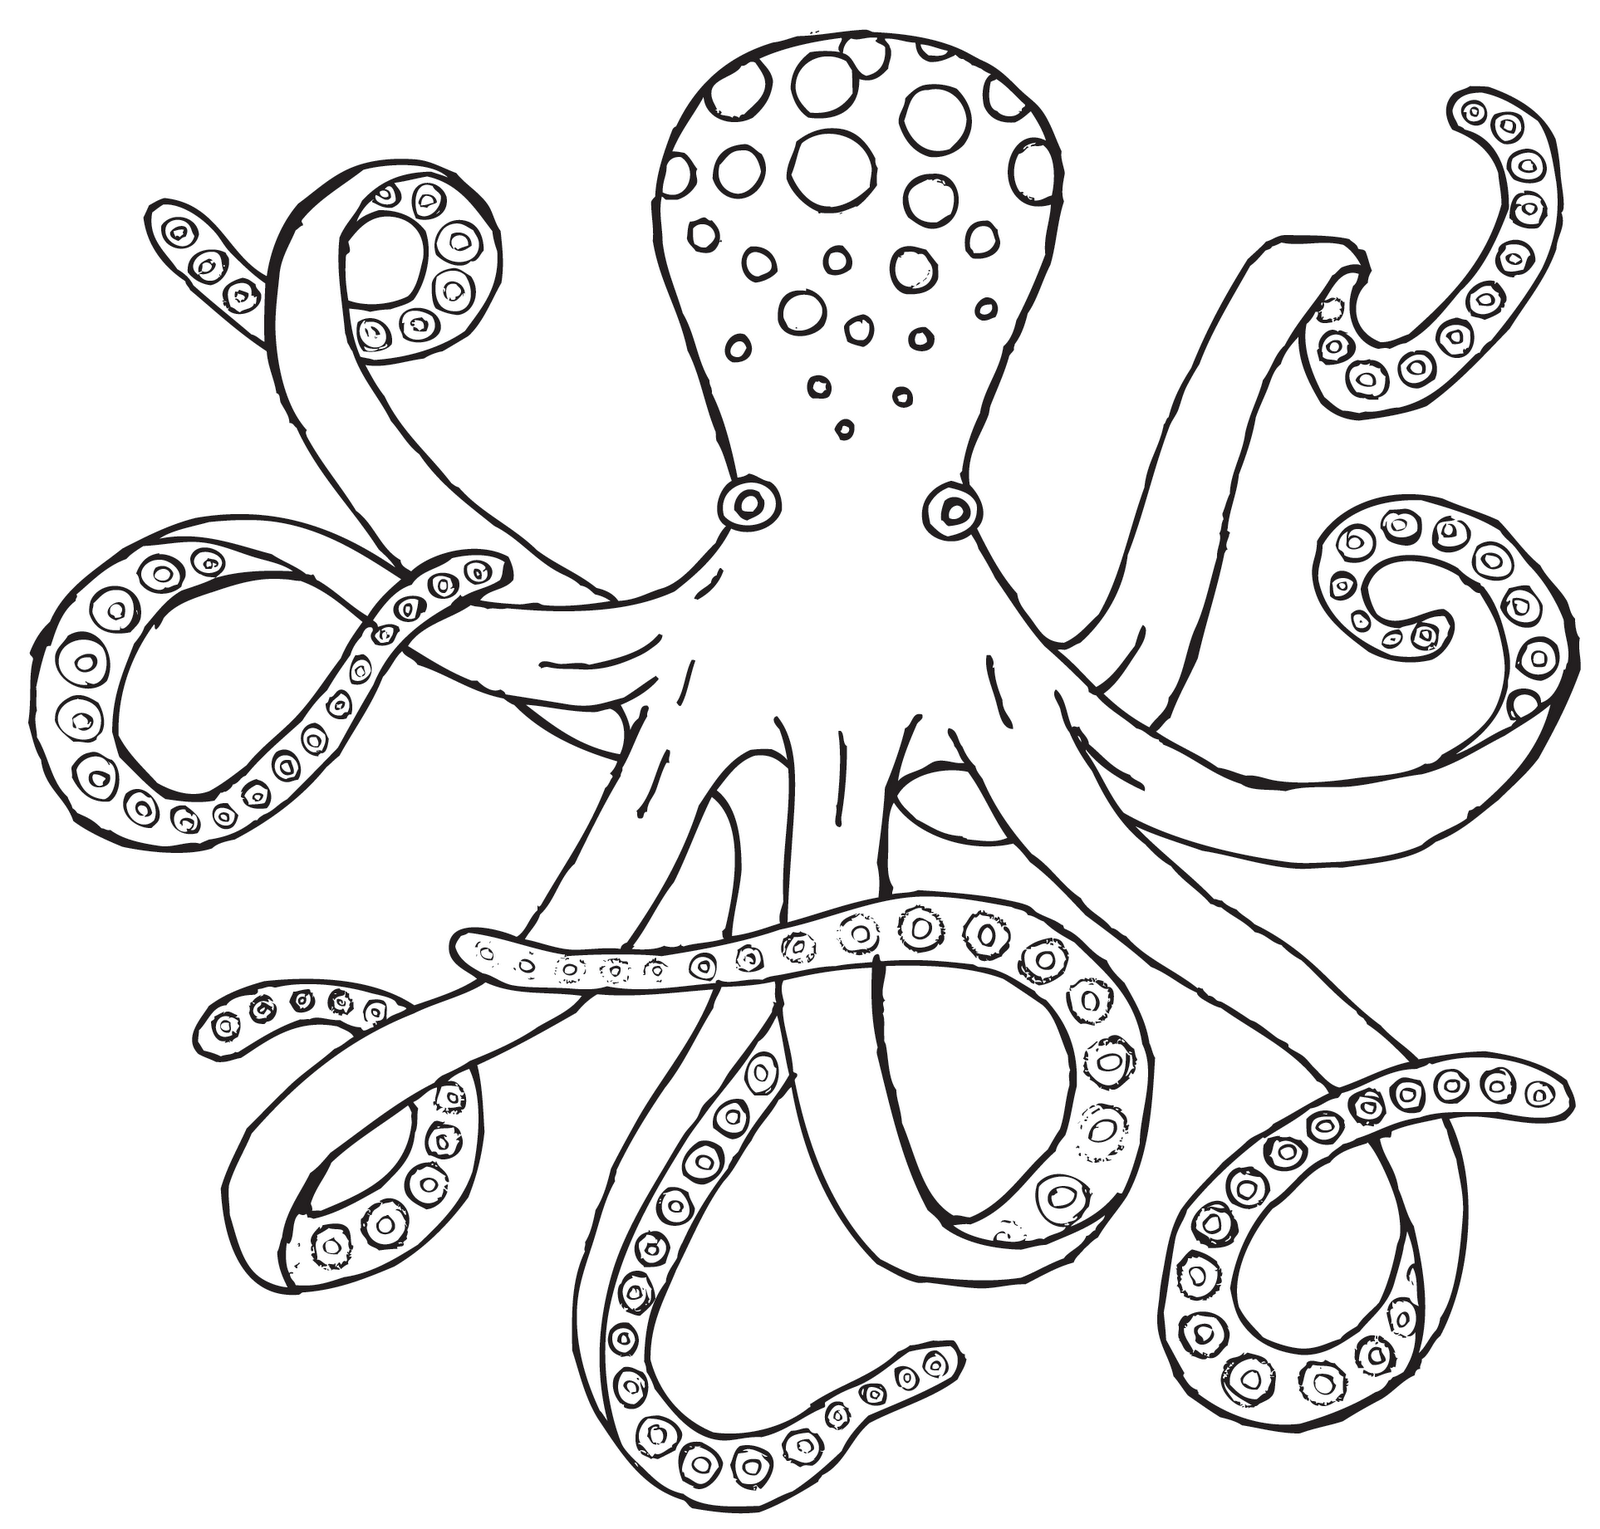 Black and white . Clipart octopus octopus drawing